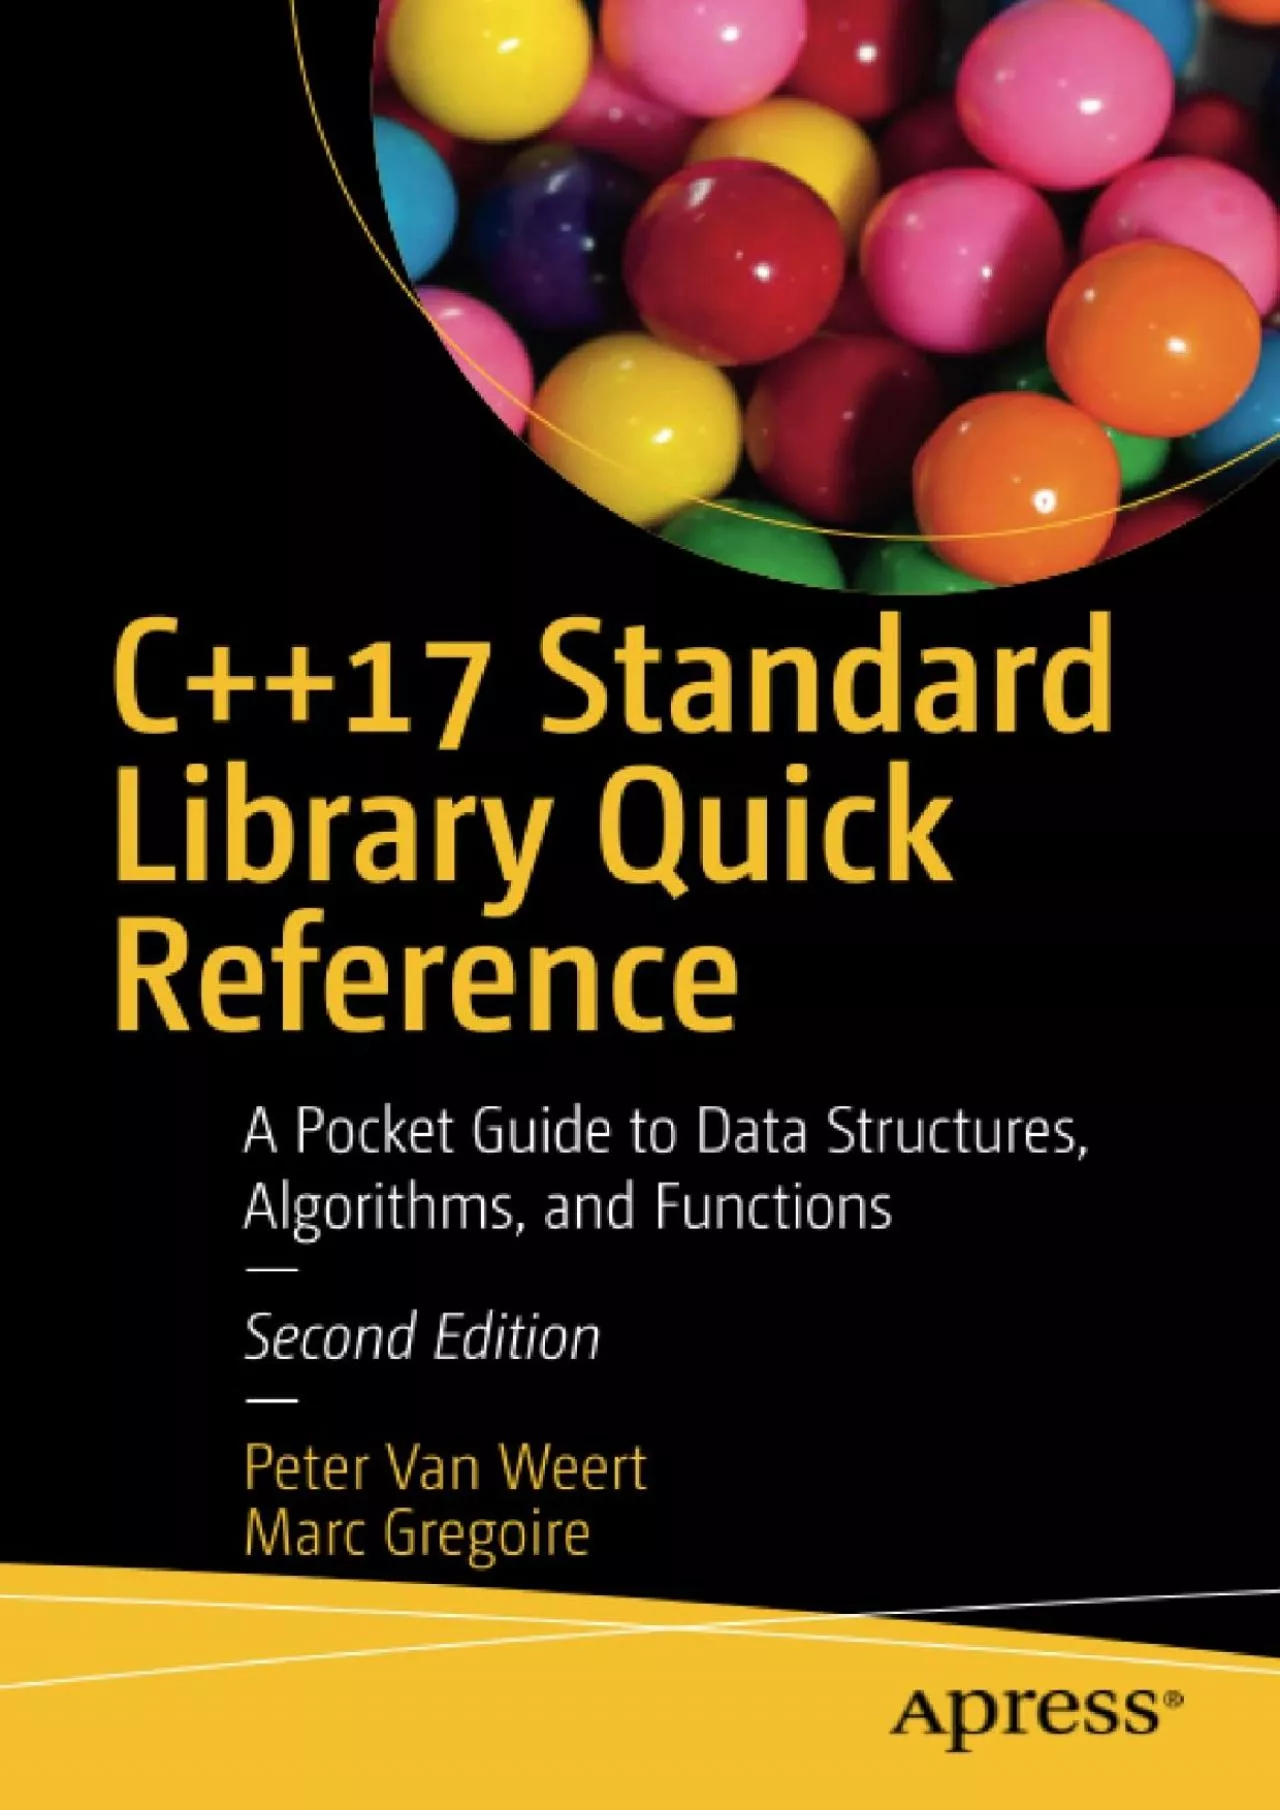 [READING BOOK]-C++17 Standard Library Quick Reference: A Pocket Guide to Data Structures,